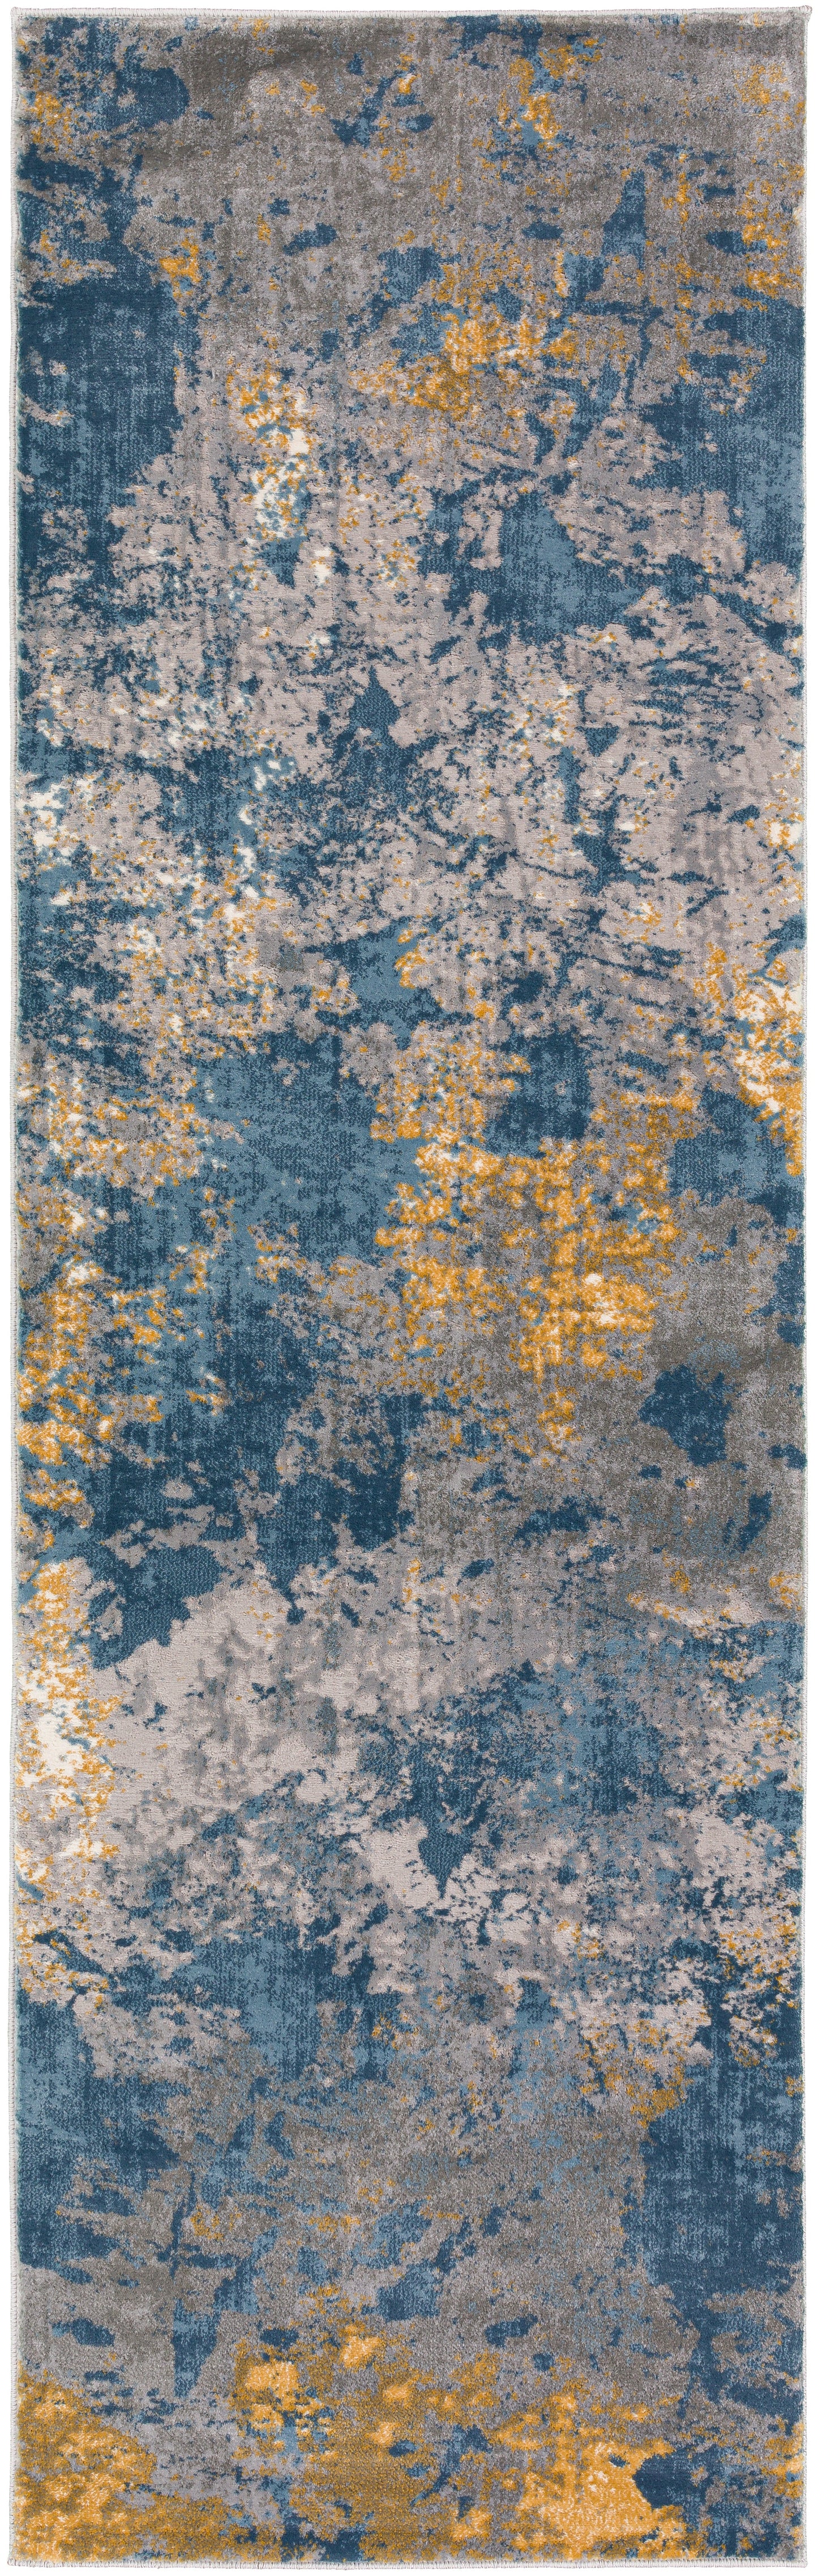 Cascina CC9 Machine Woven Synthetic Blend Indoor Area Rug by Dalyn Rugs